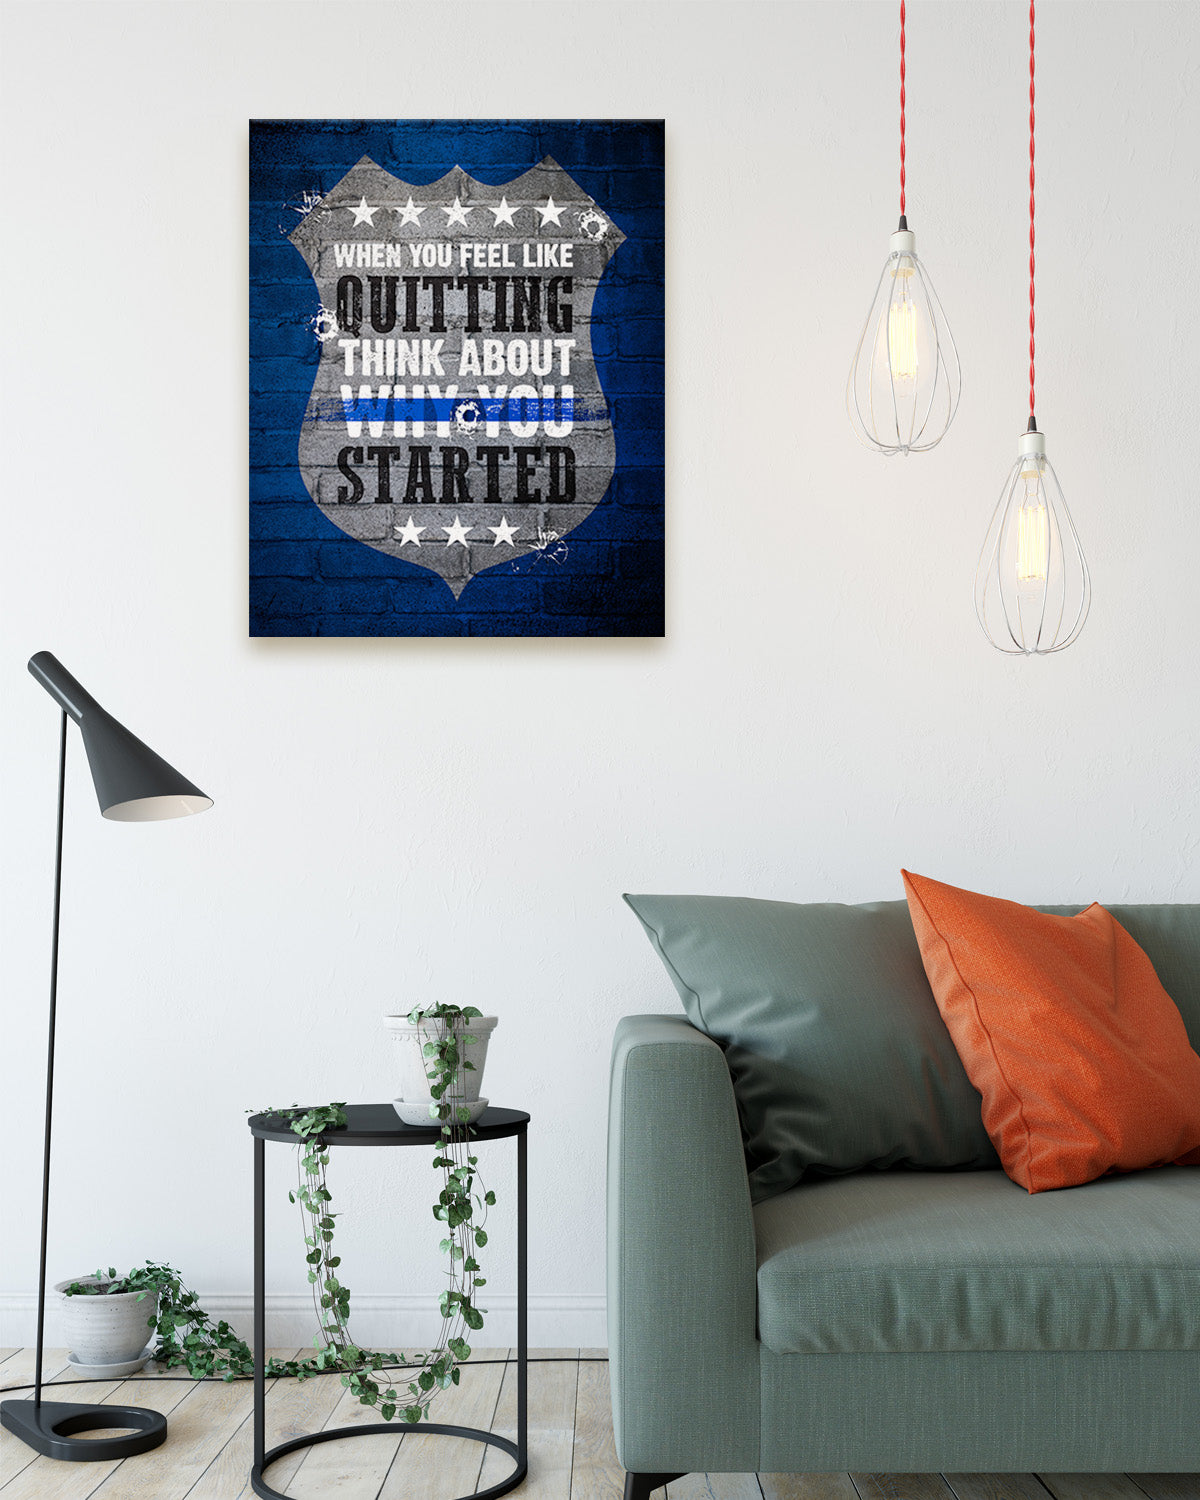 Thin Blue Line Wall Art - Law Enforcement Prints - Police Officer Gifts - Police Academy Graduation - Police Officer Wall Decor - Law Enforcement Appreciation Gift